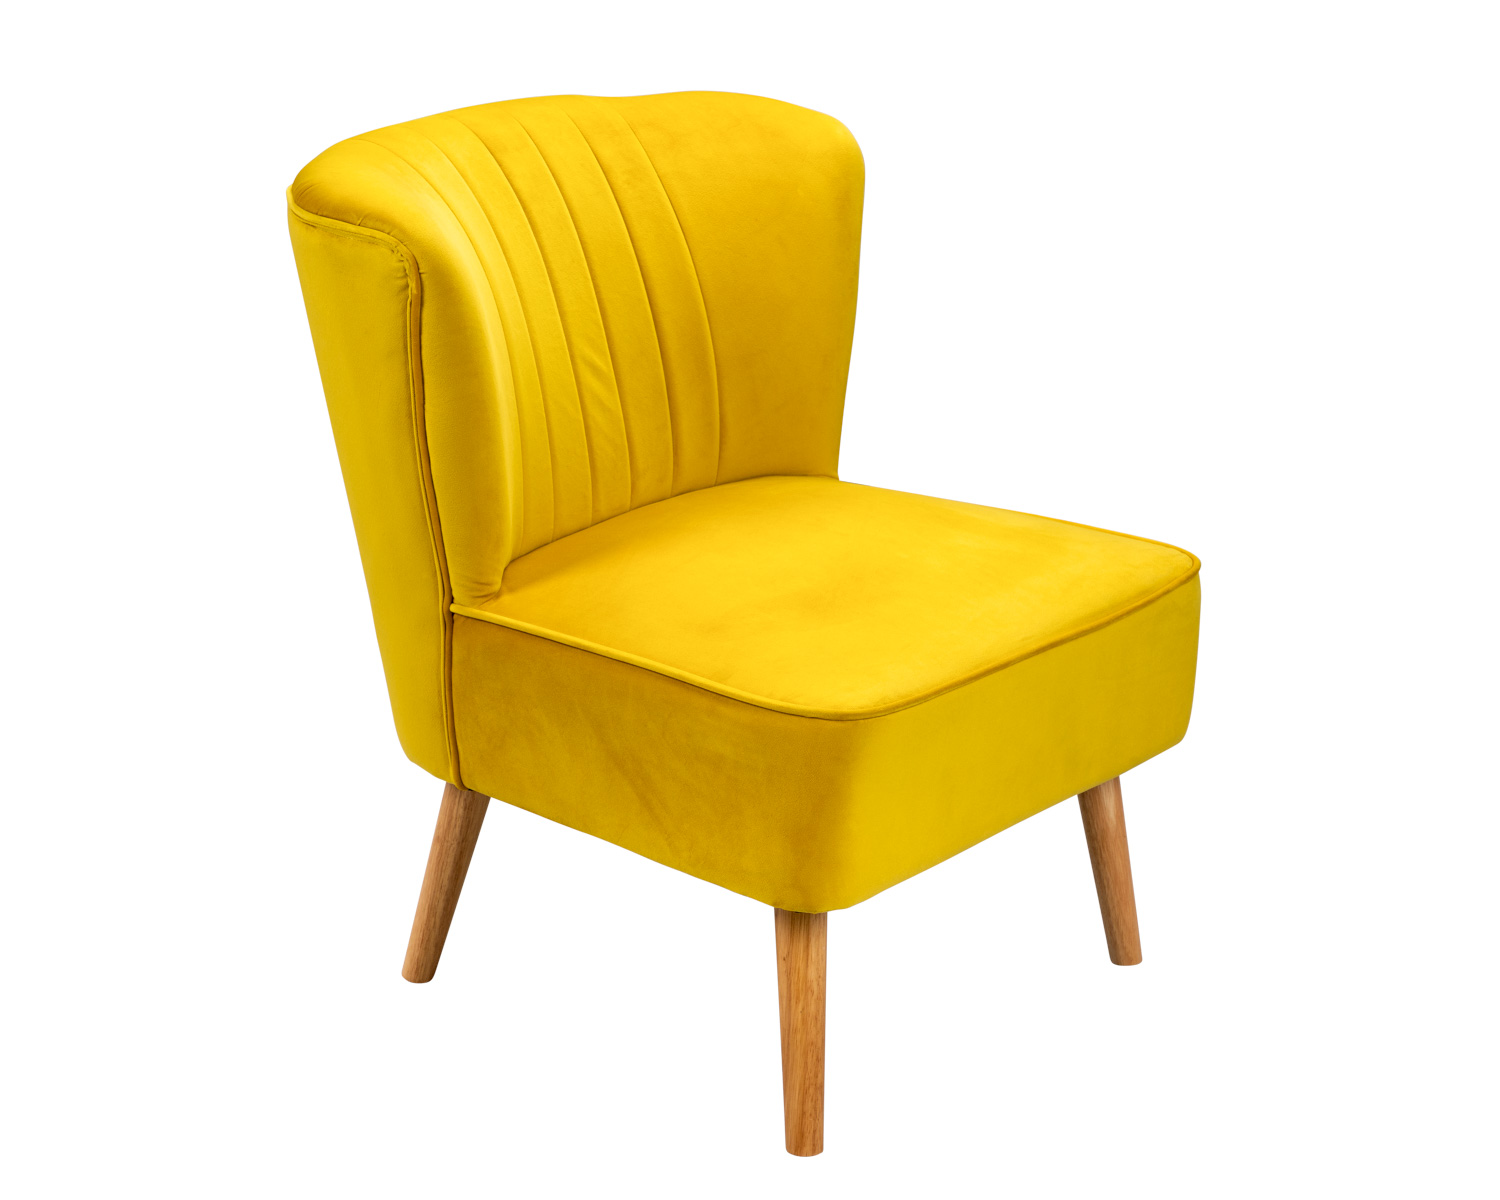 Image of Accent Chair in Mustard Yellow Velvet with Natural Wood Legs - Lucy Oyster Range